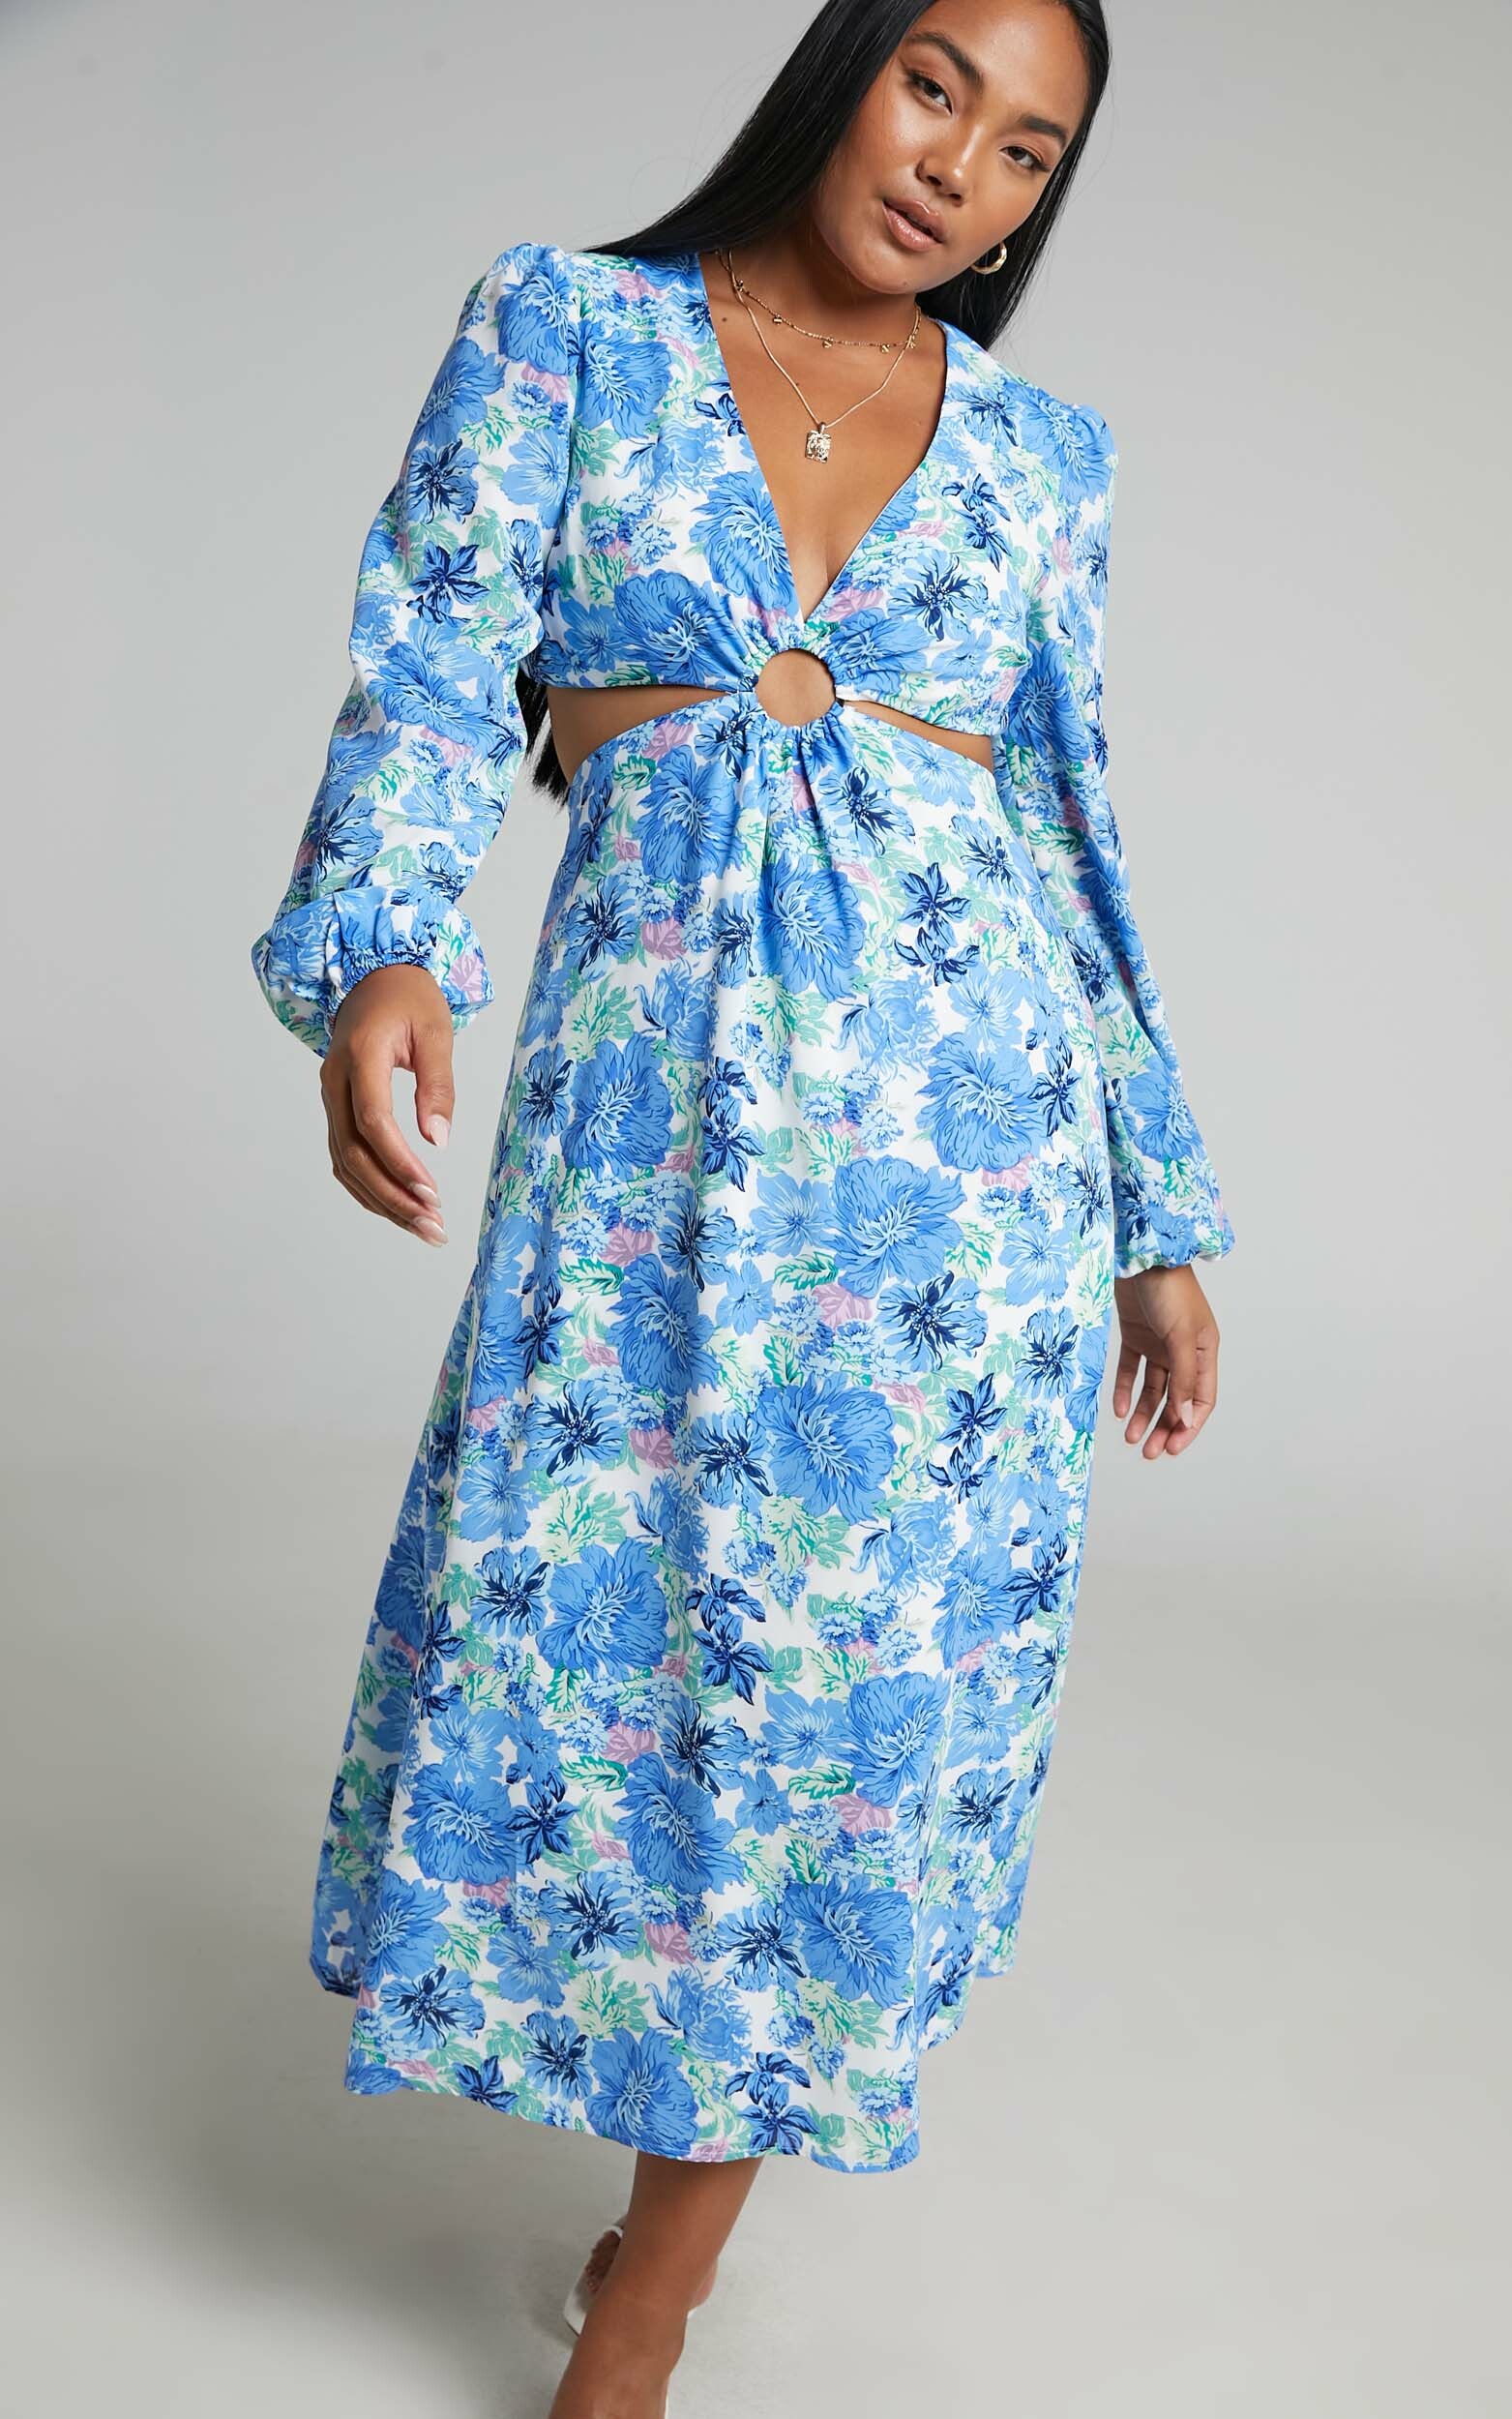 Geneve Ring Cut Out Long Sleeve Midi Dress in Geneve Blue Floral - 04, MLT1, hi-res image number null